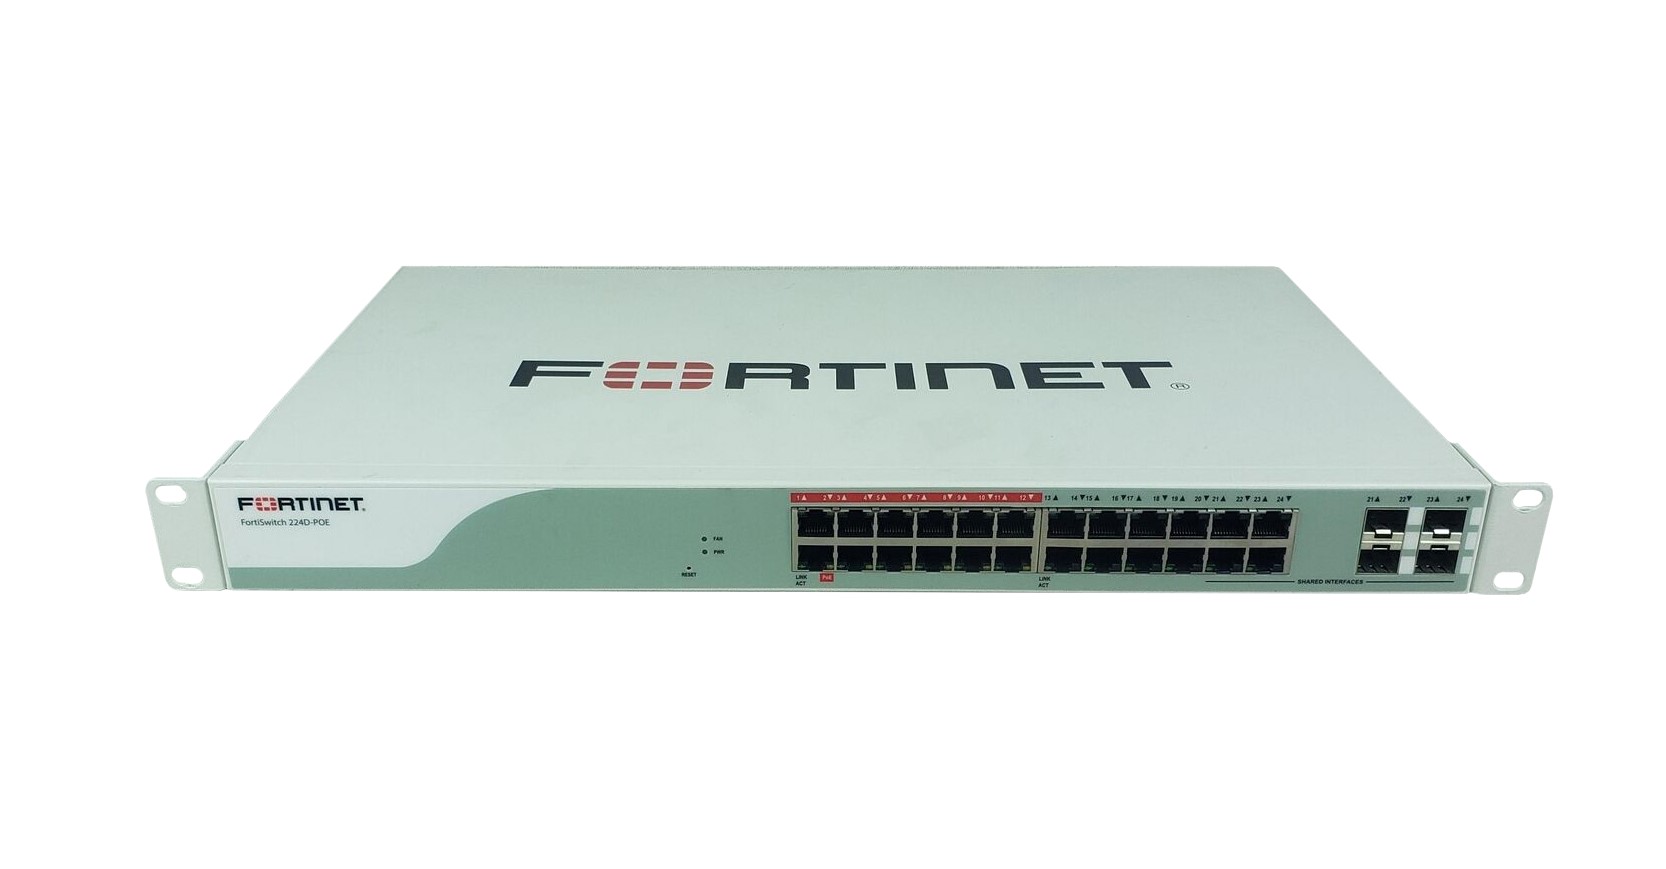 Buy FS-224D-POE-USG - Fortinet FortiSwitch 24 x Ports 1000Base-T